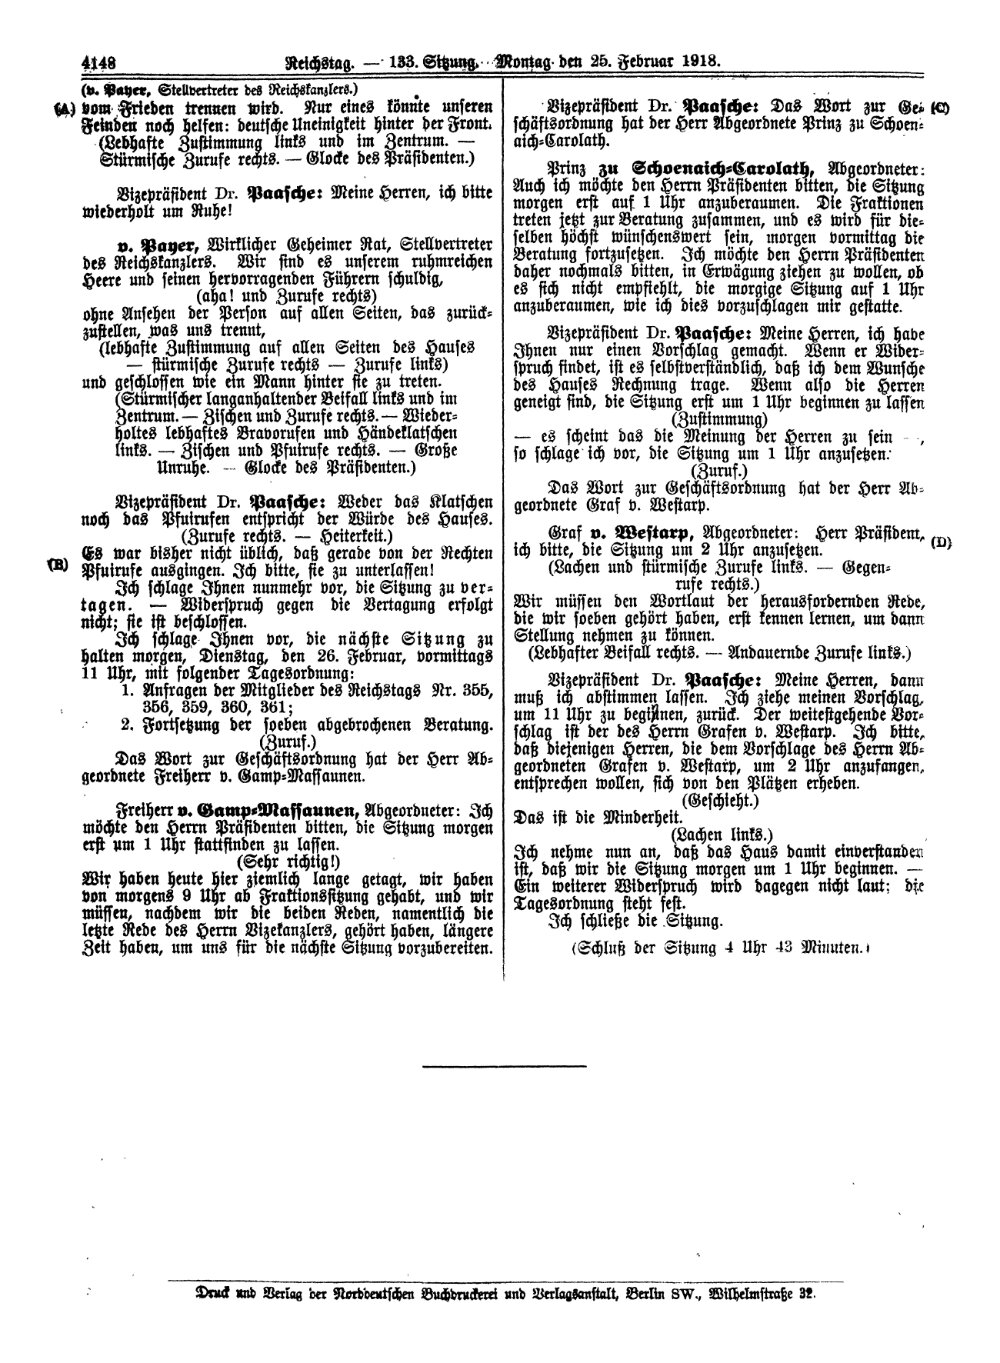 Scan of page 4148